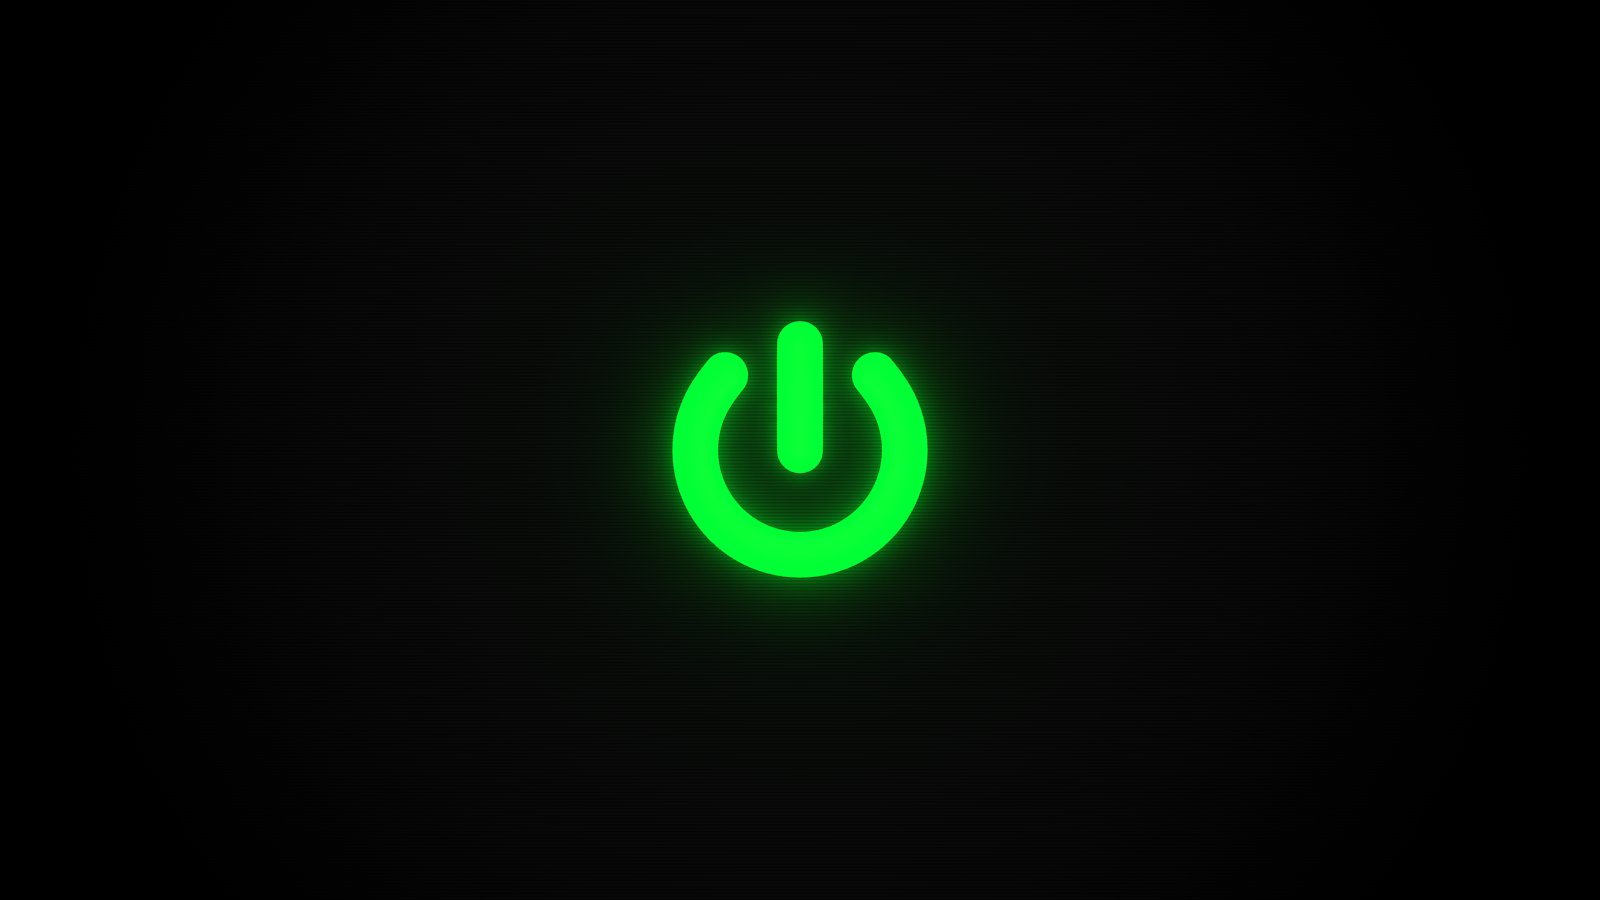 Glowing green power button. Cool image. Symbols